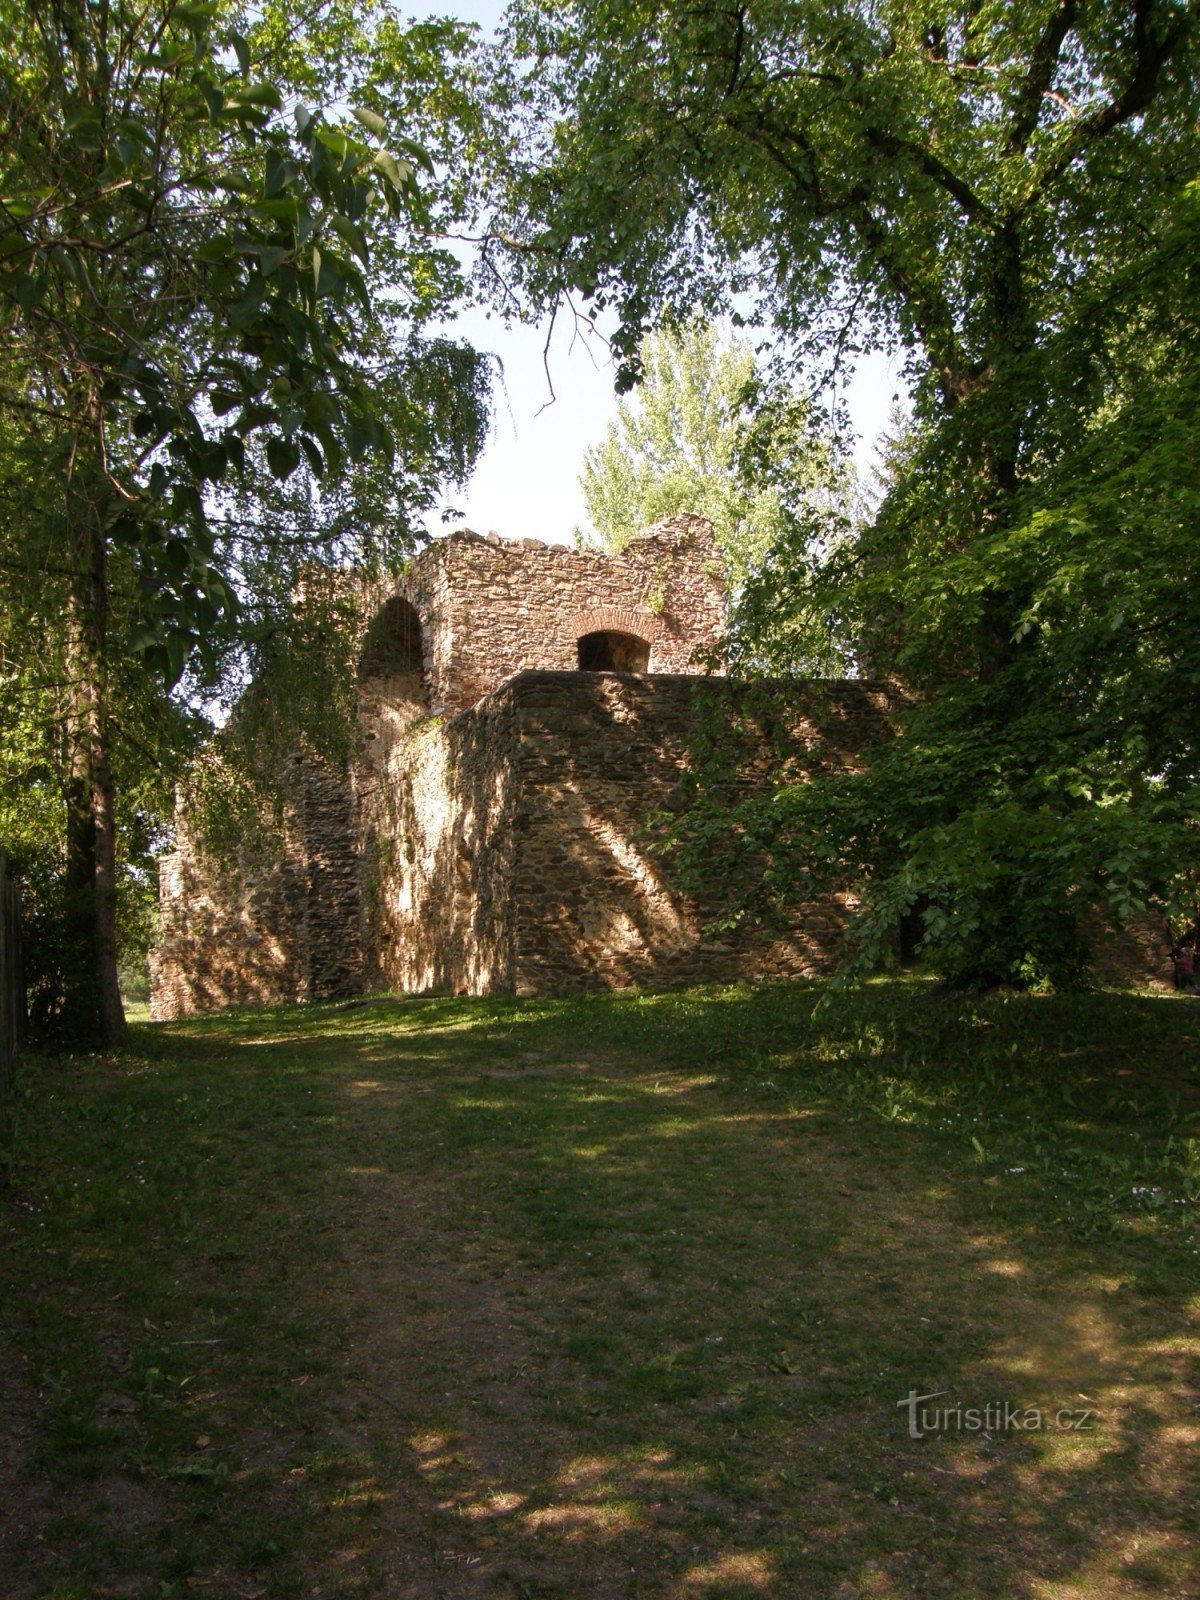 The fortress is about 70 m from the center of the village.